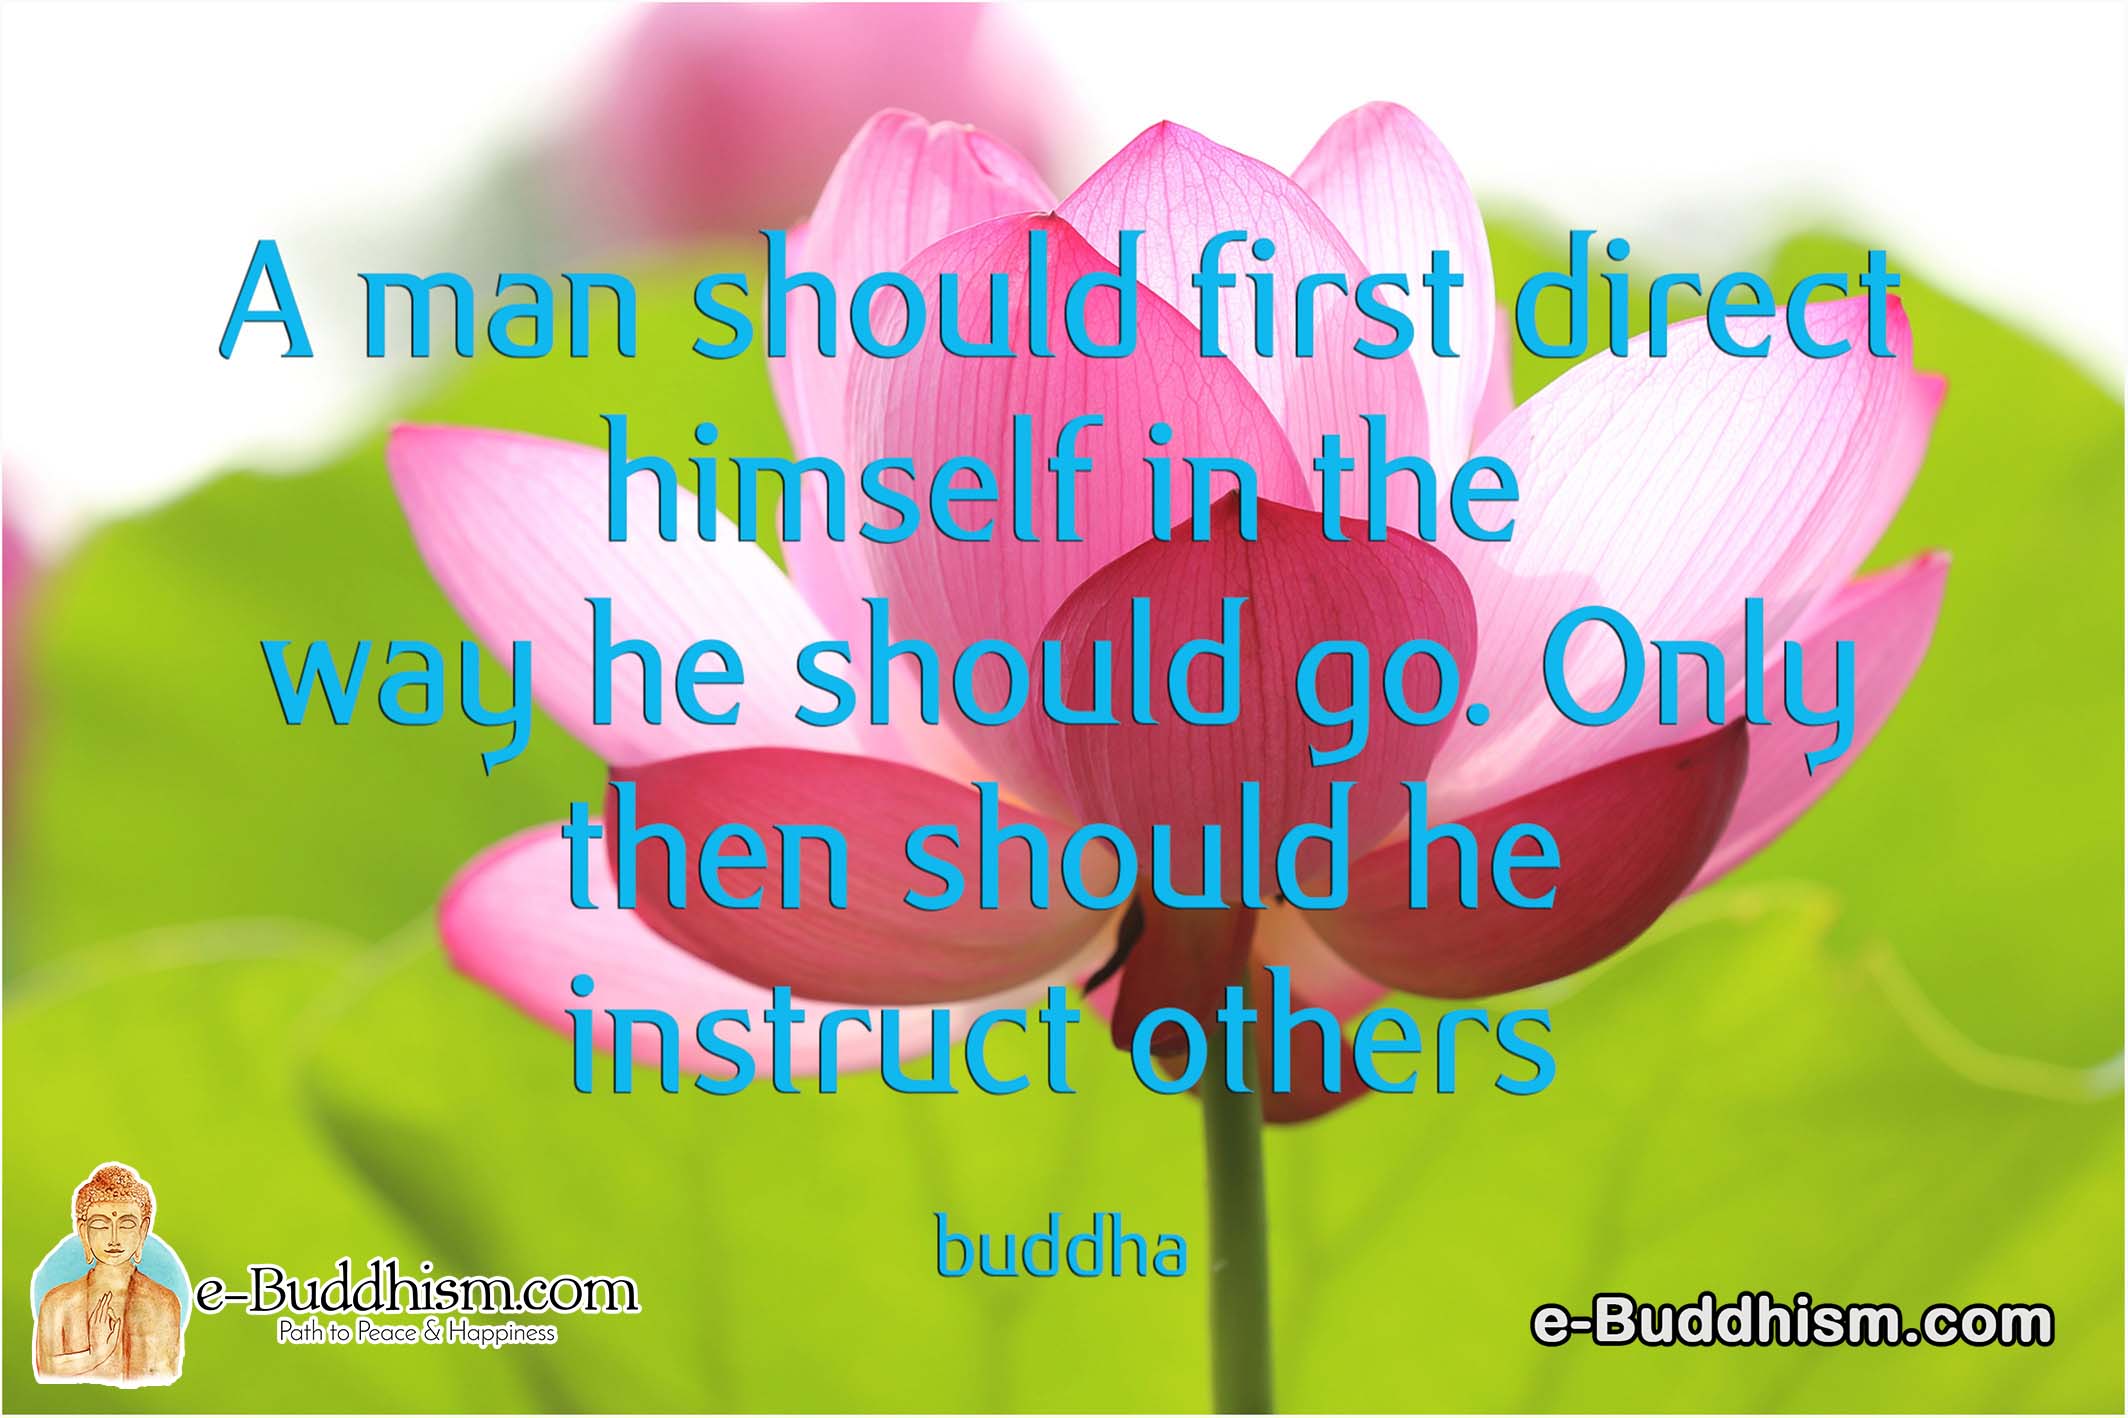 A man himself first direct himself in the way he should go. Only then should he instruct others. -Buddha